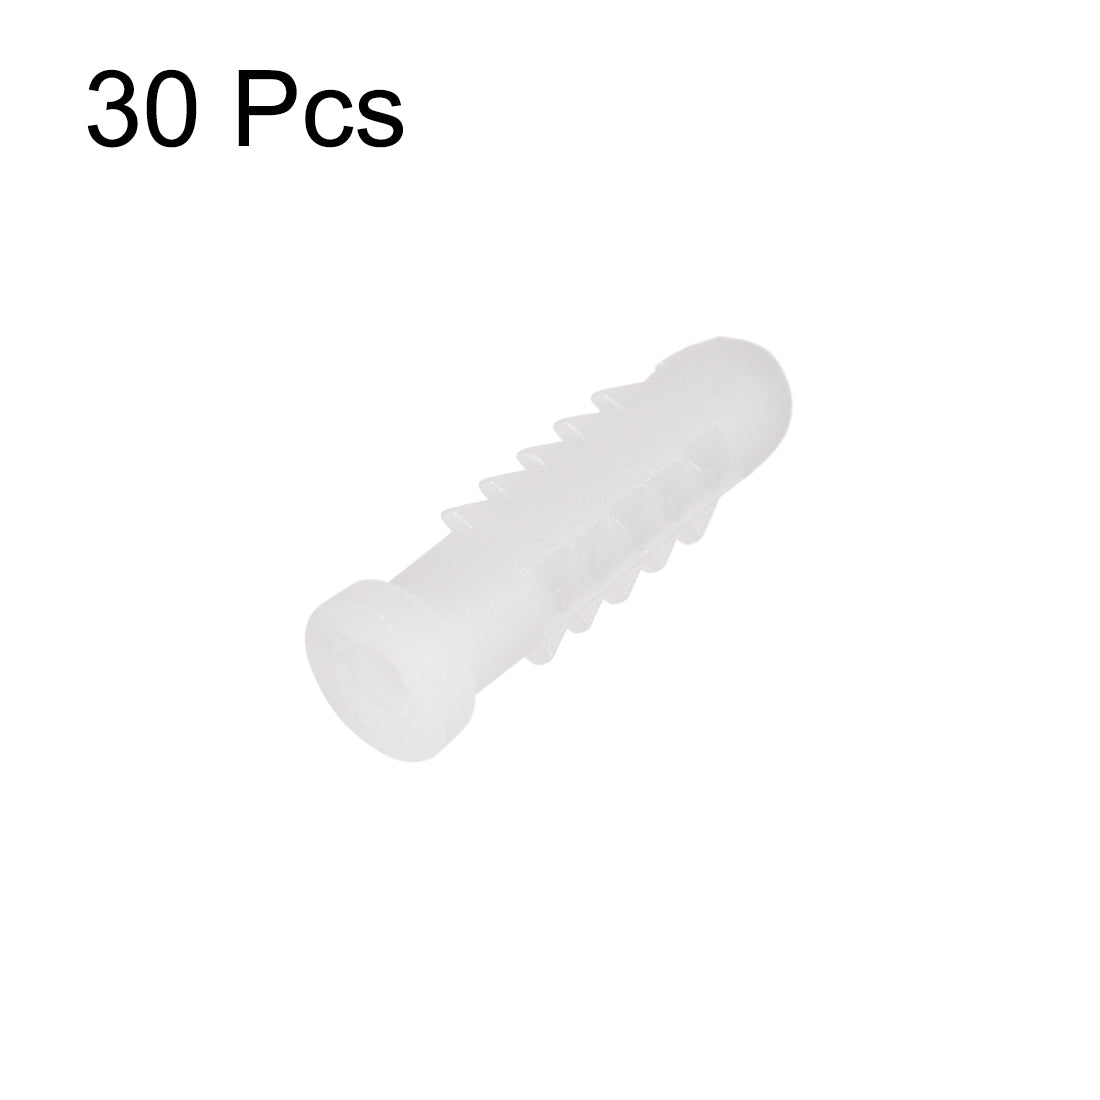 uxcell Uxcell 6x25mm Plastic Bolts Expansion Pipe Column Frame Fixings White 30pcs